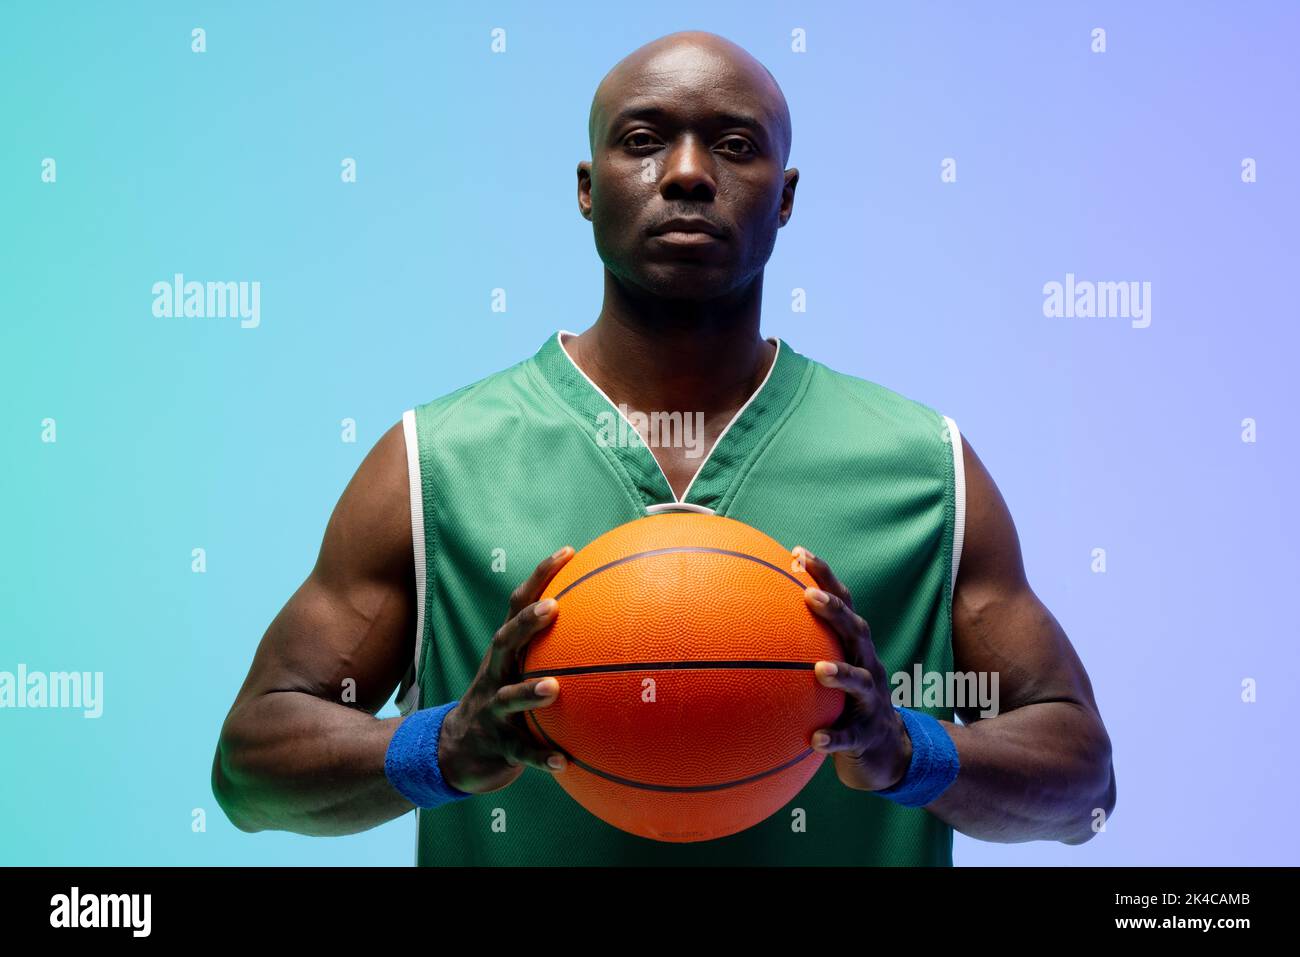 Image of african american basketball player with basketball on green to blue background. Sports and competition concept. Stock Photo